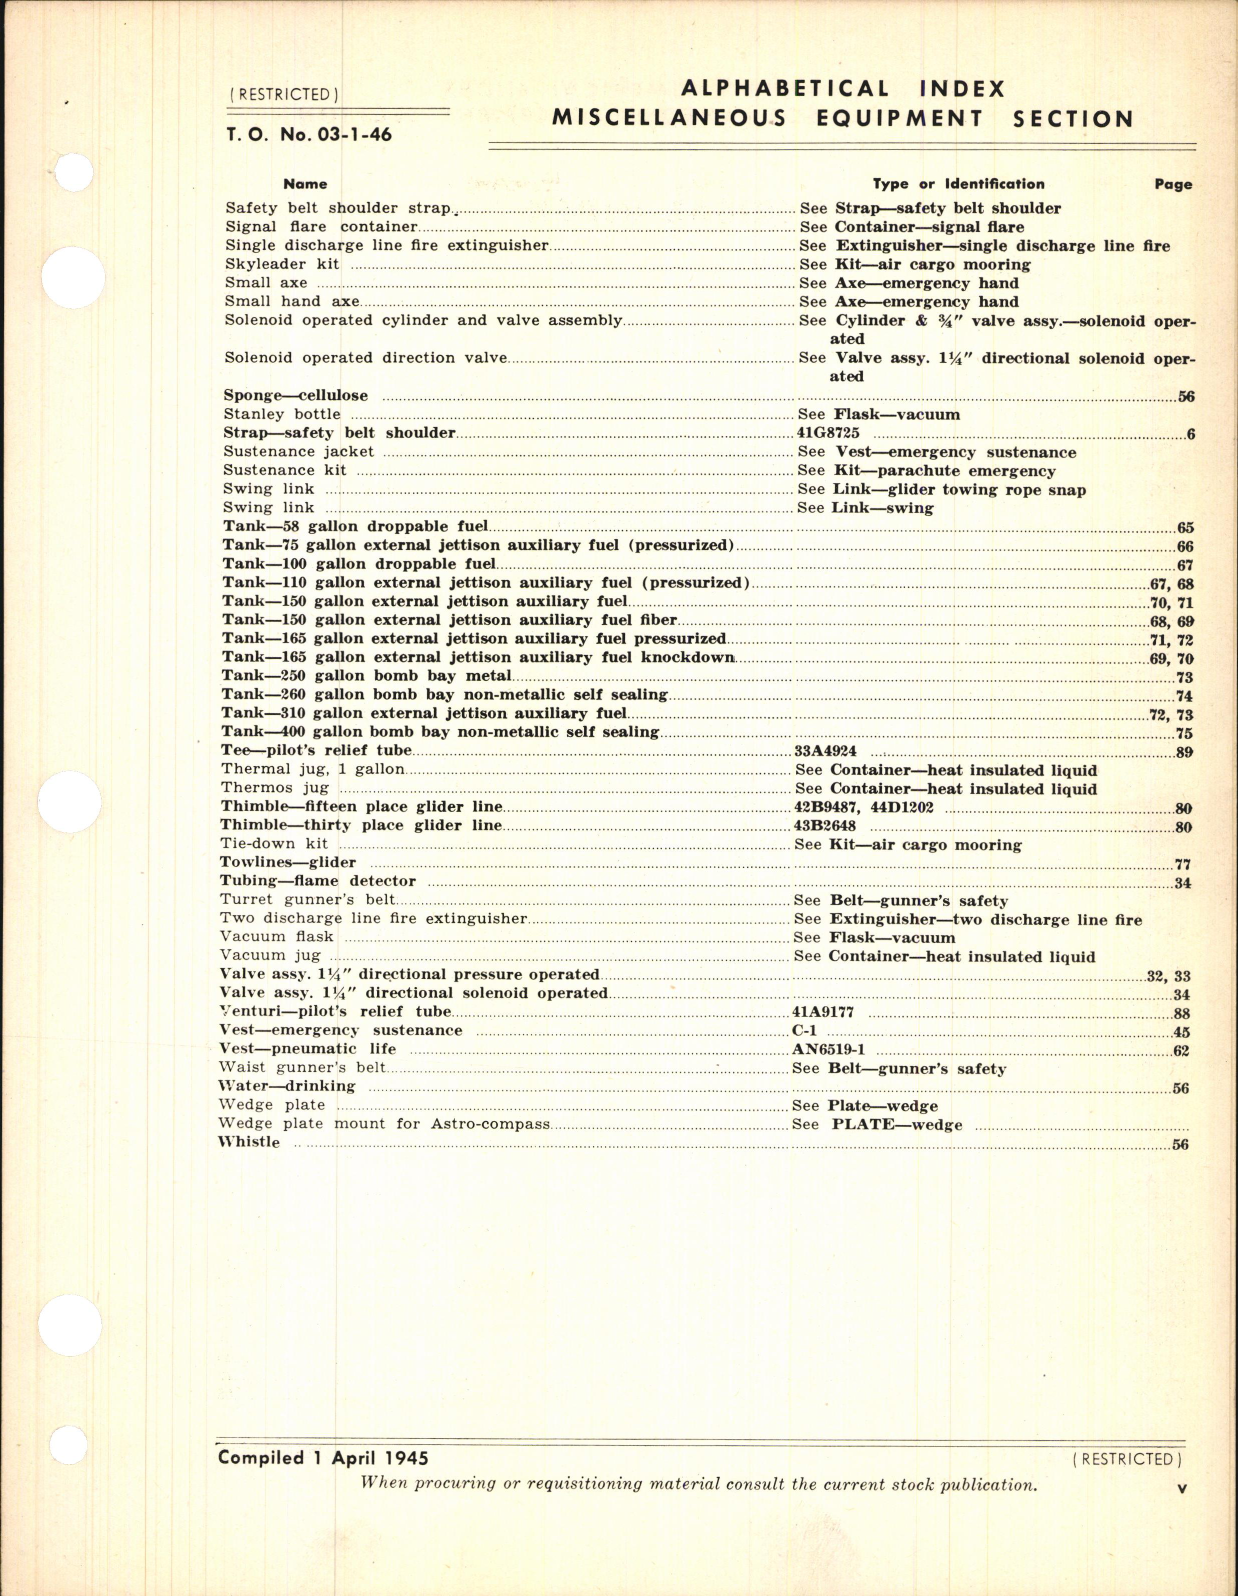 Sample page 7 from AirCorps Library document: Index of Army-Navy Aeronautical Equipment - Miscellaneous